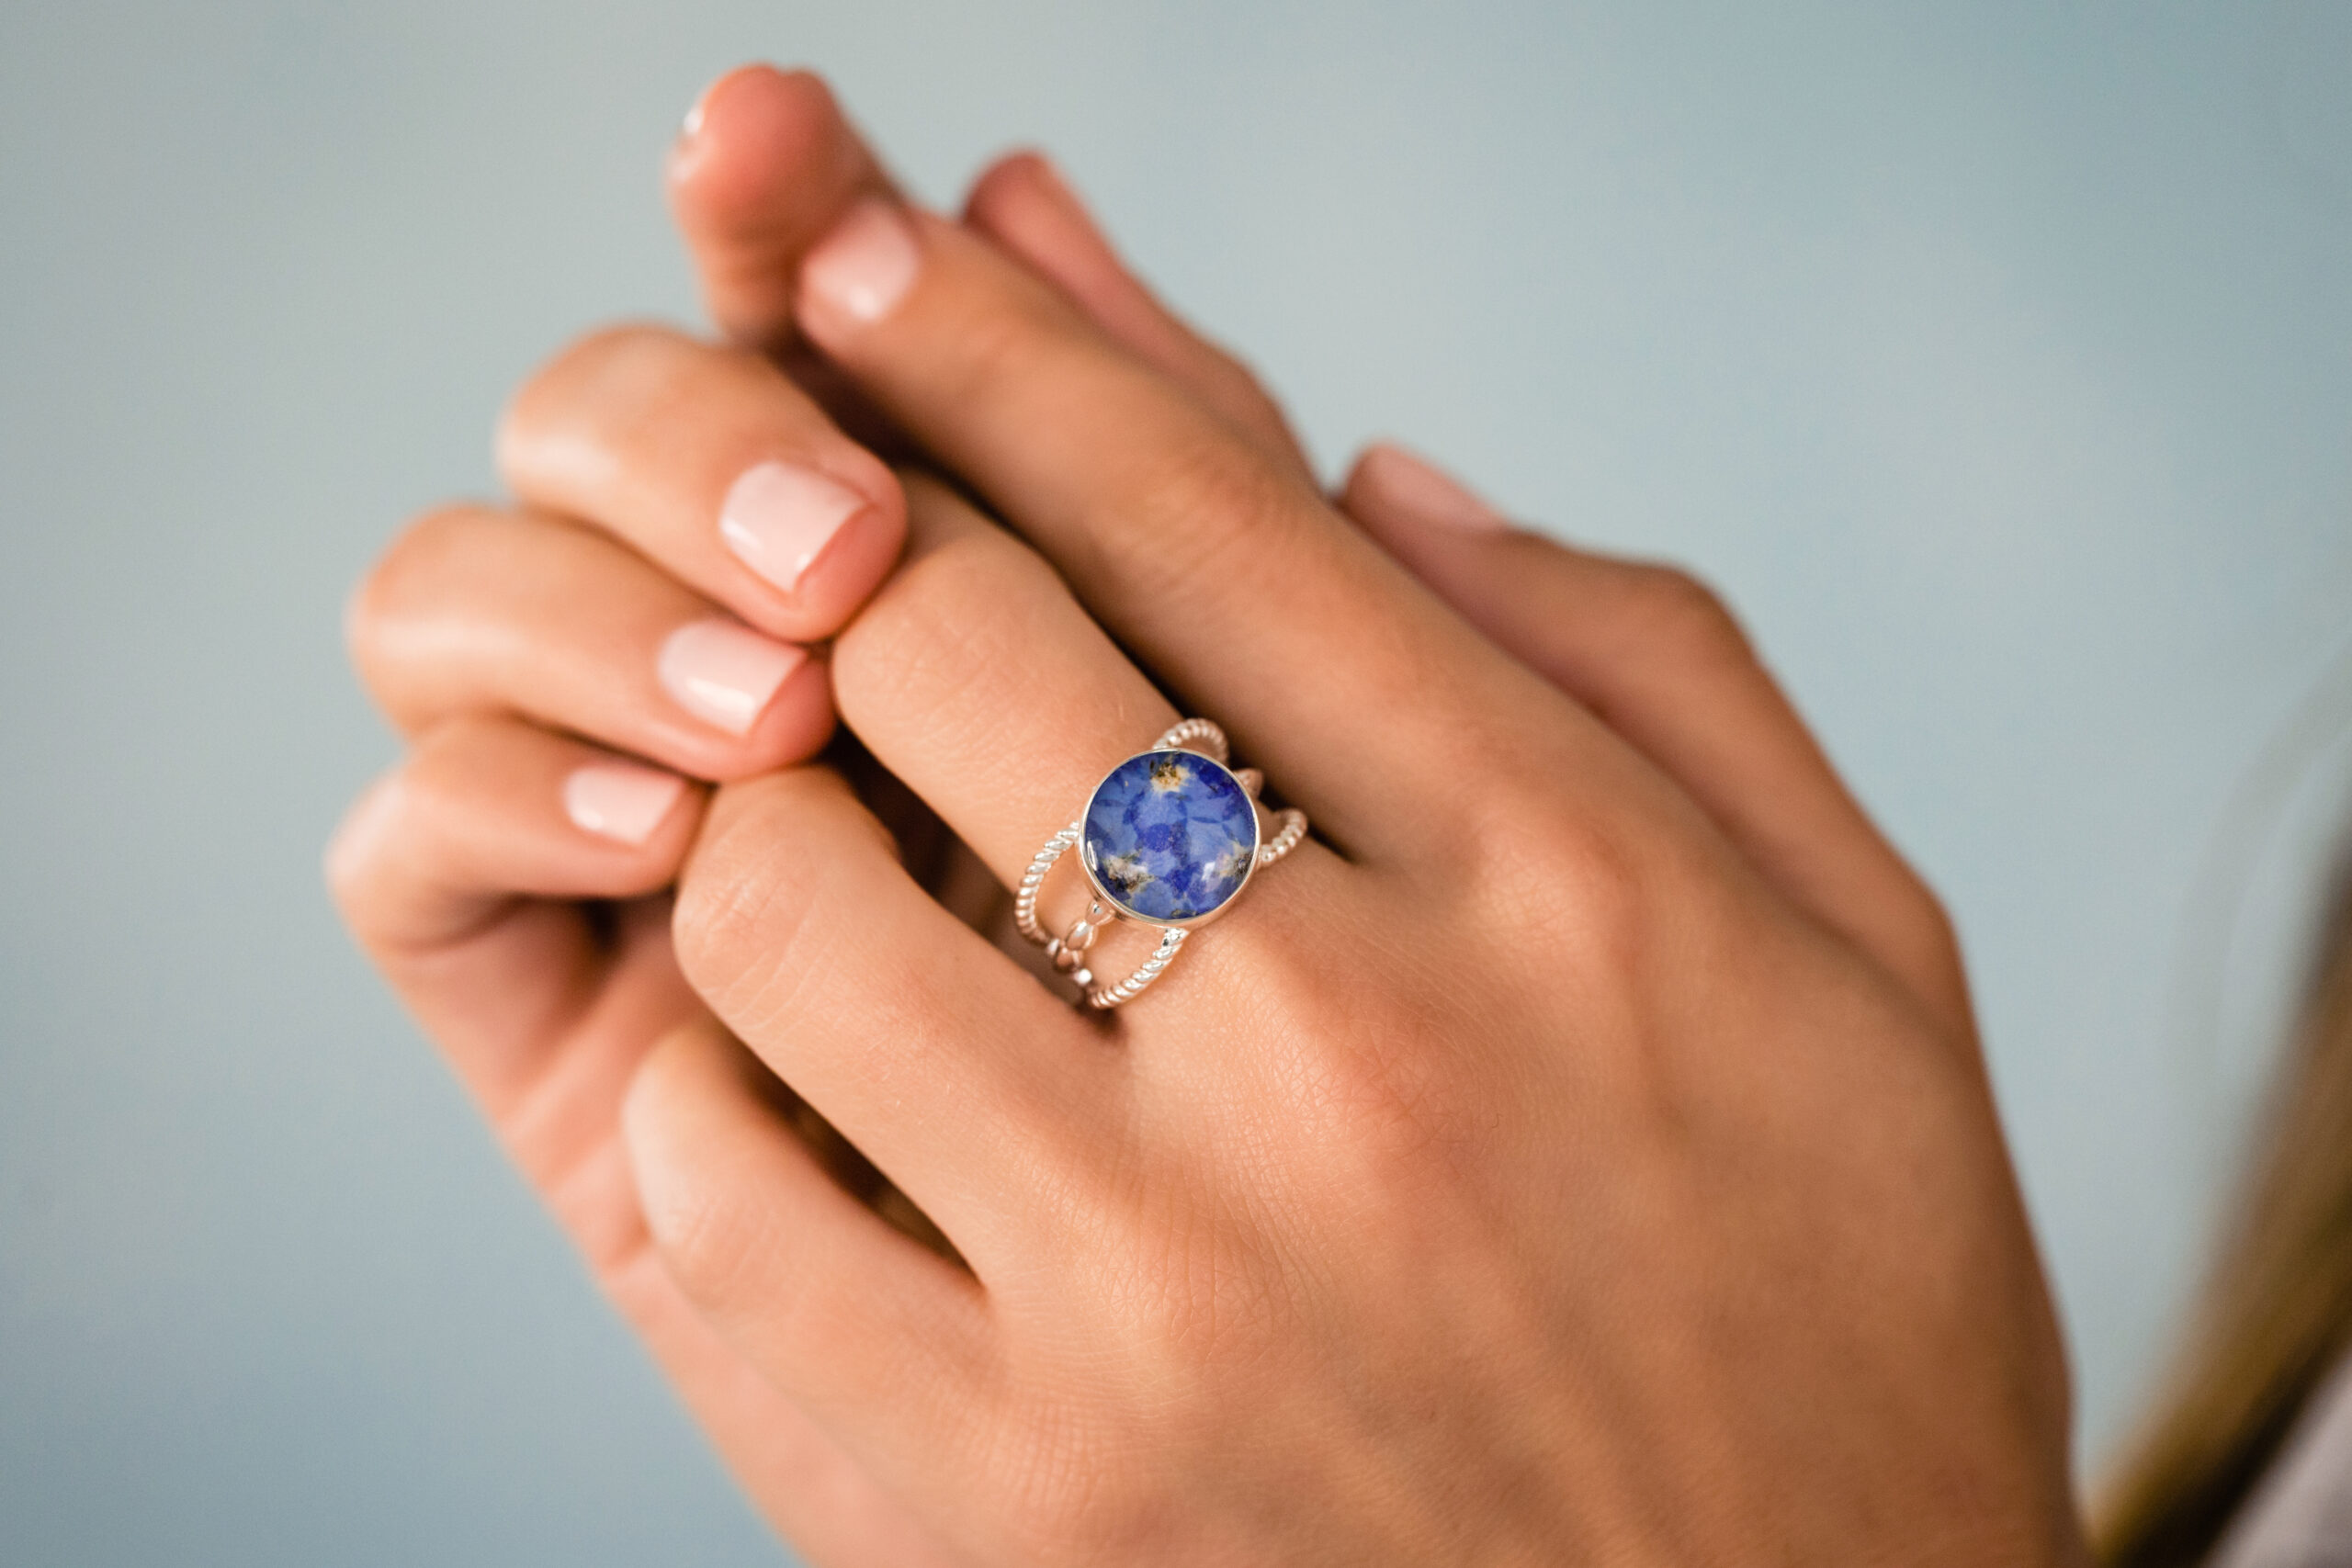 Product shot modeled on hand of the round boho ring with forget-me-not flower petals in bezel.